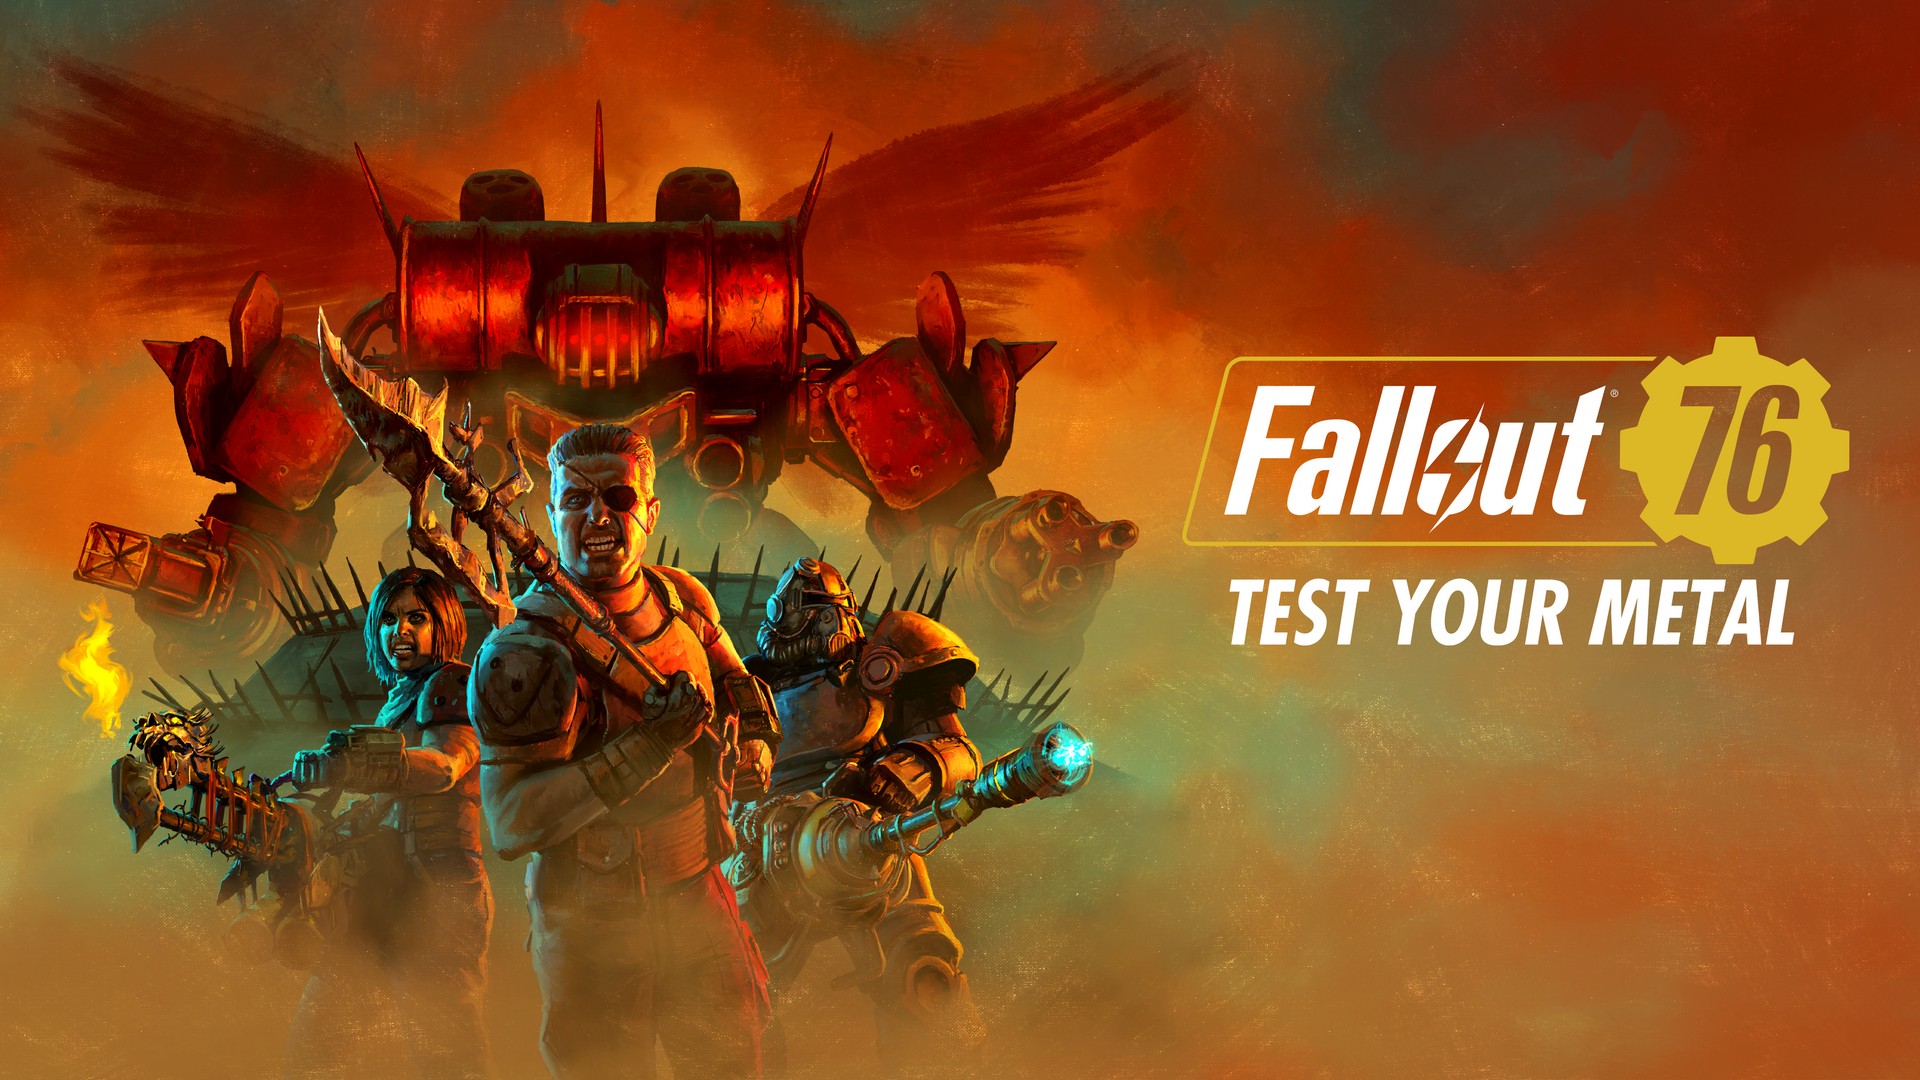 Fallout 76 – The Test Your Metal Update Is Now Available & Free To All Players